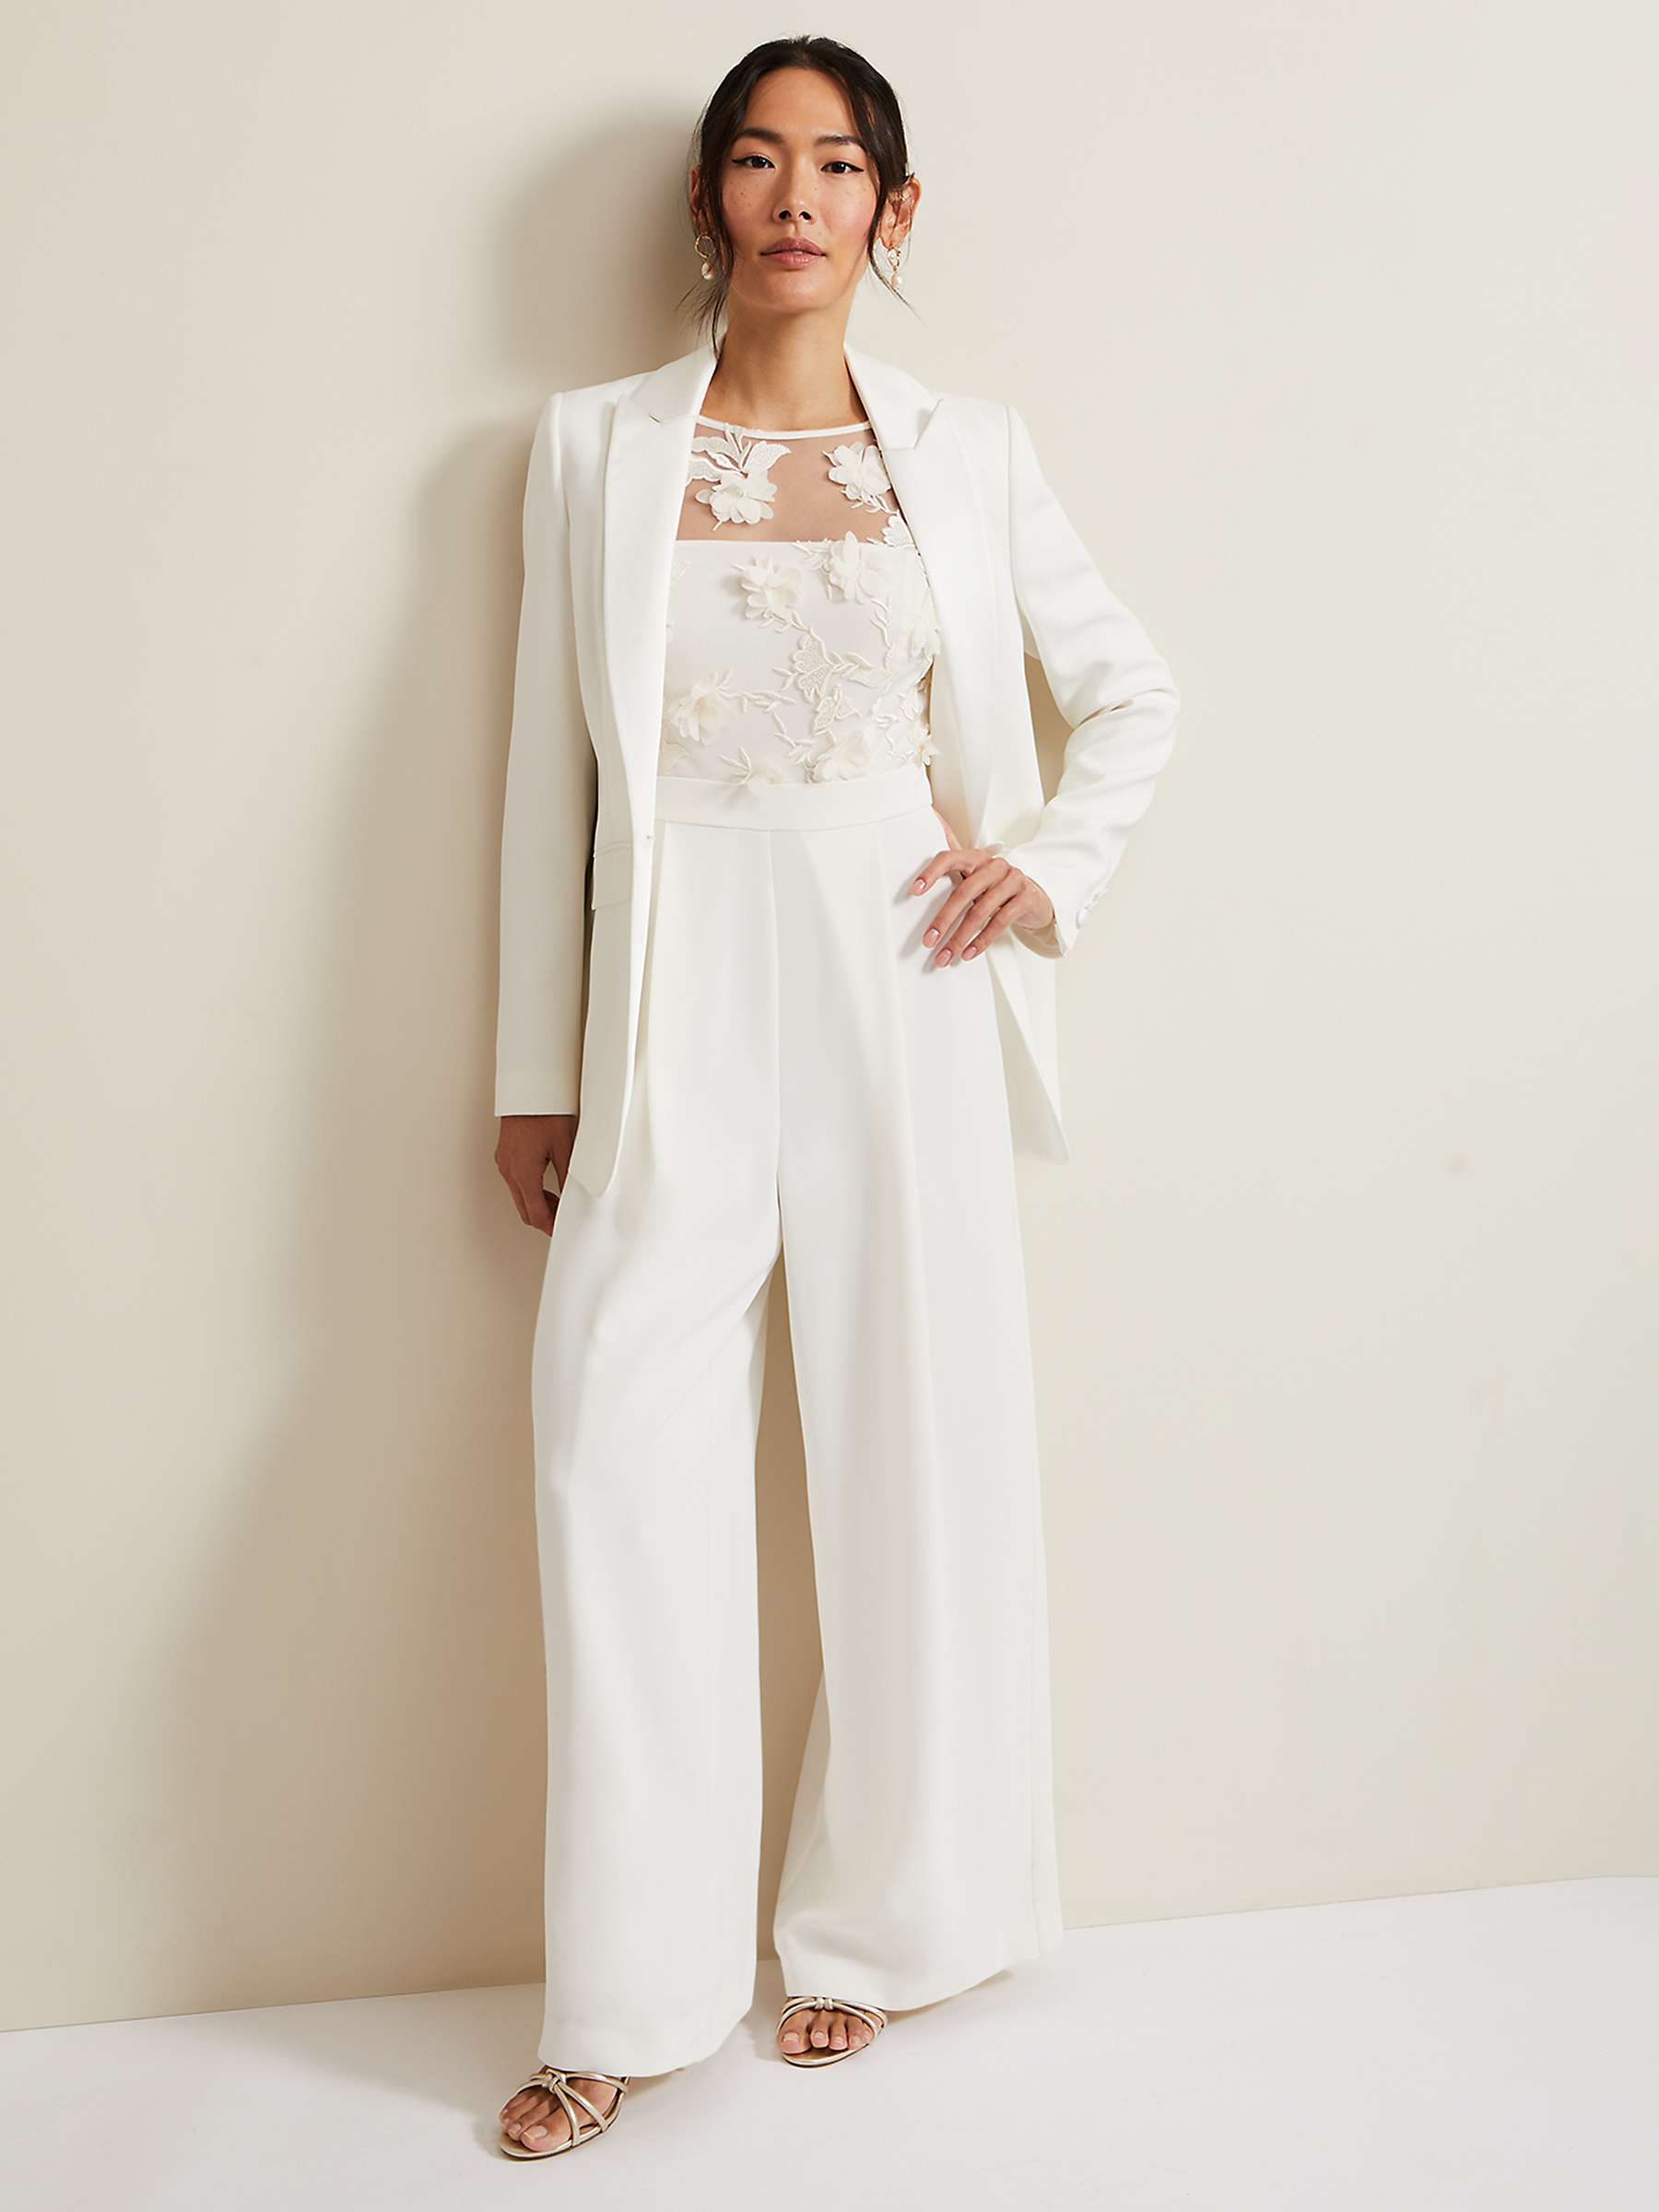 Buy Phase Eight Cherie Bridal Floral Textured Overlay Jumpsuit, Ivory Online at johnlewis.com